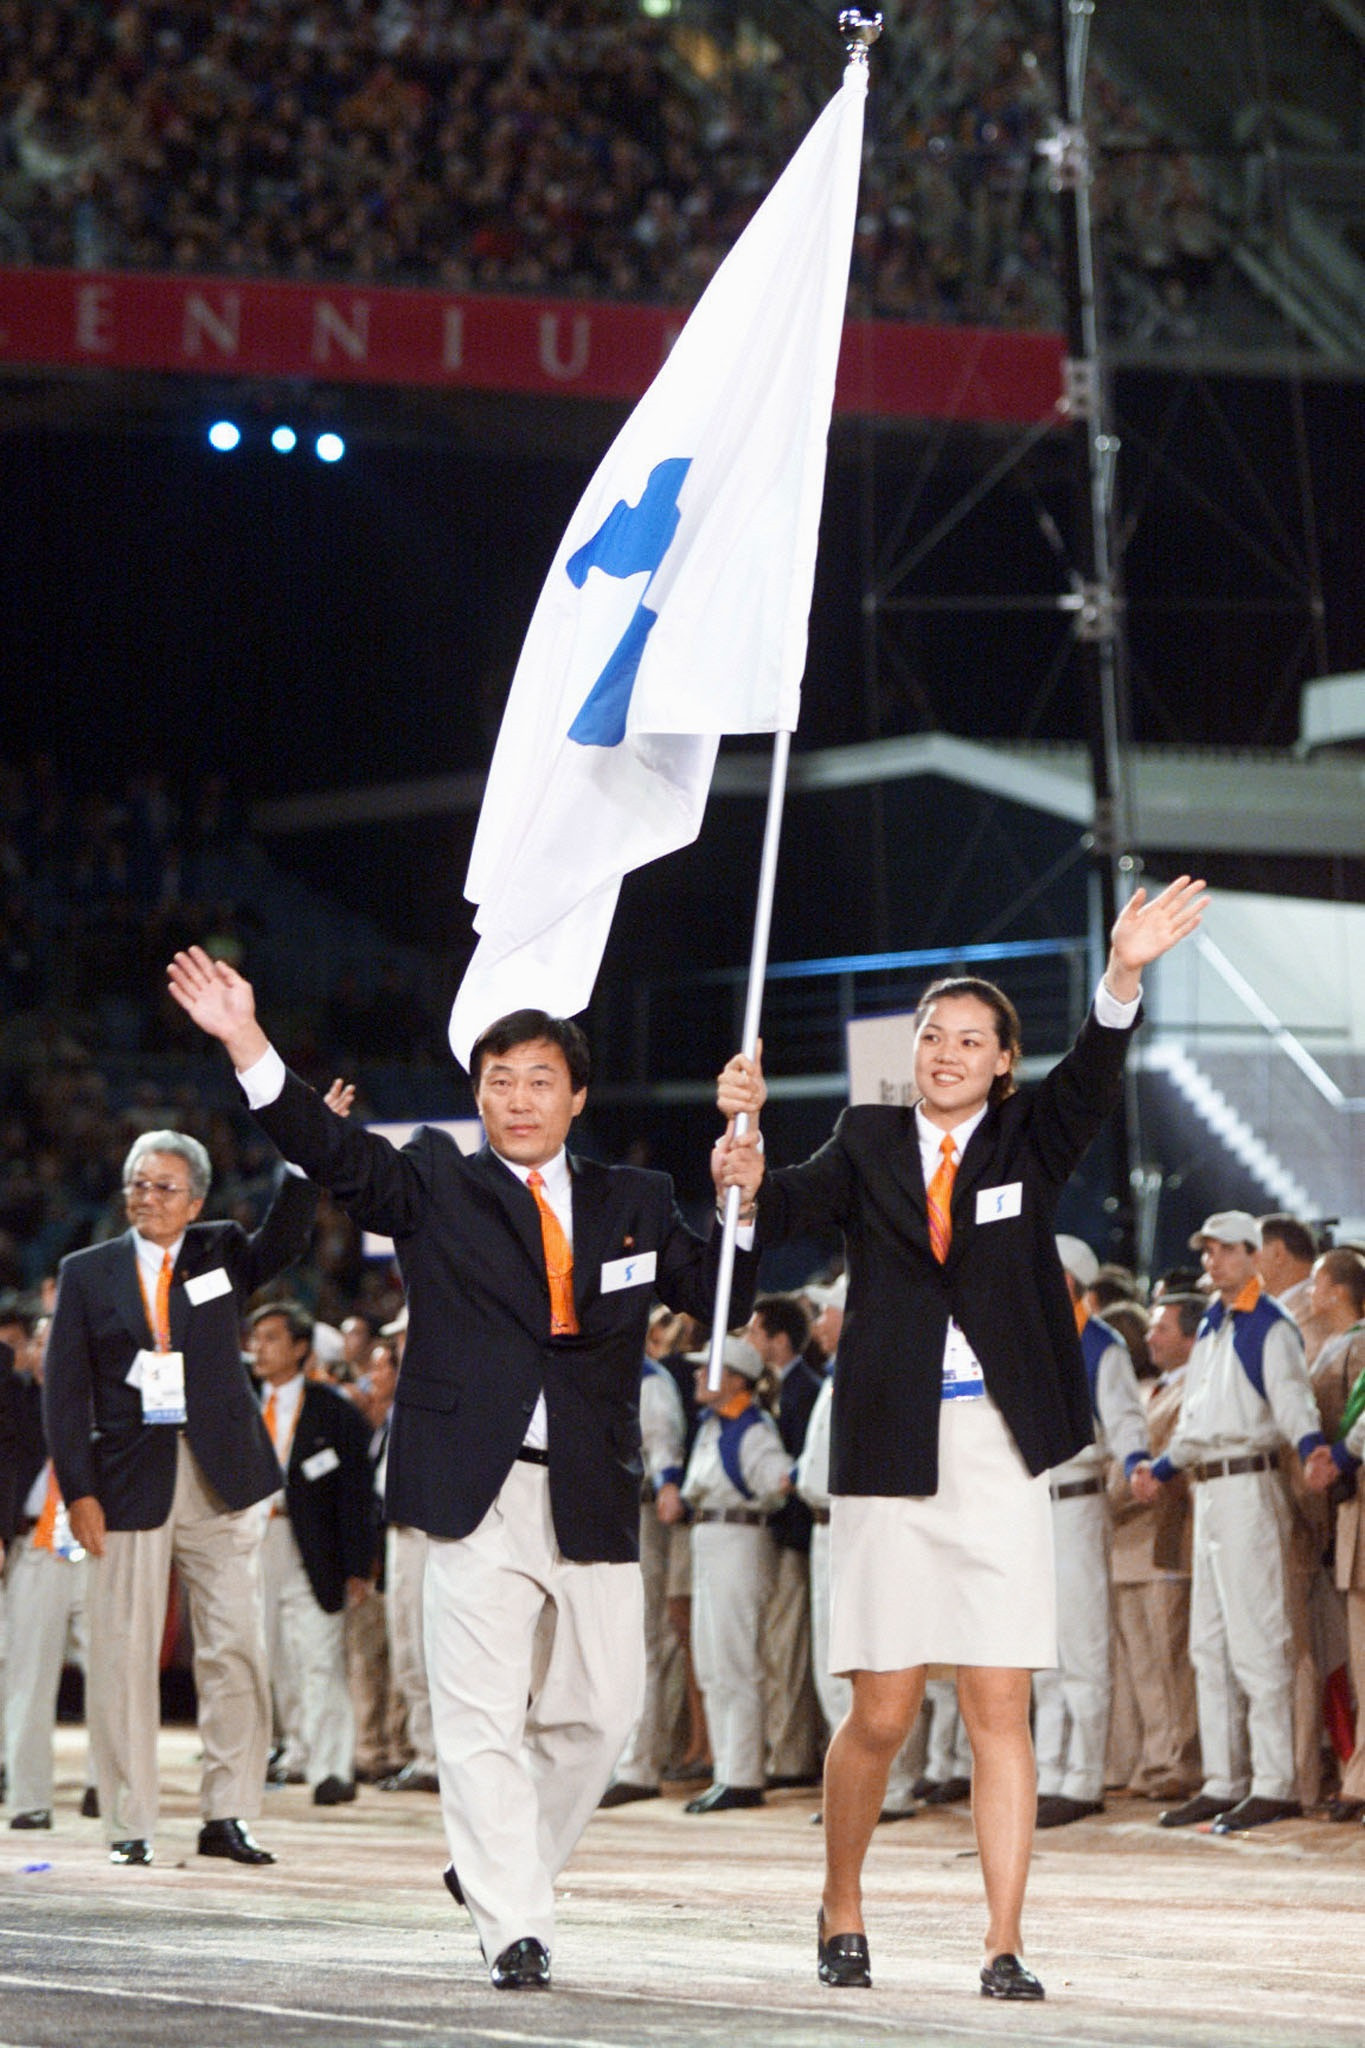 North and South Korea are set to march together at the Opening Ceremony of the Pyeongchang 2018 Winter Olympics, just as they did at the curtain raiser for the Sydney 2000 Games ©Getty Images